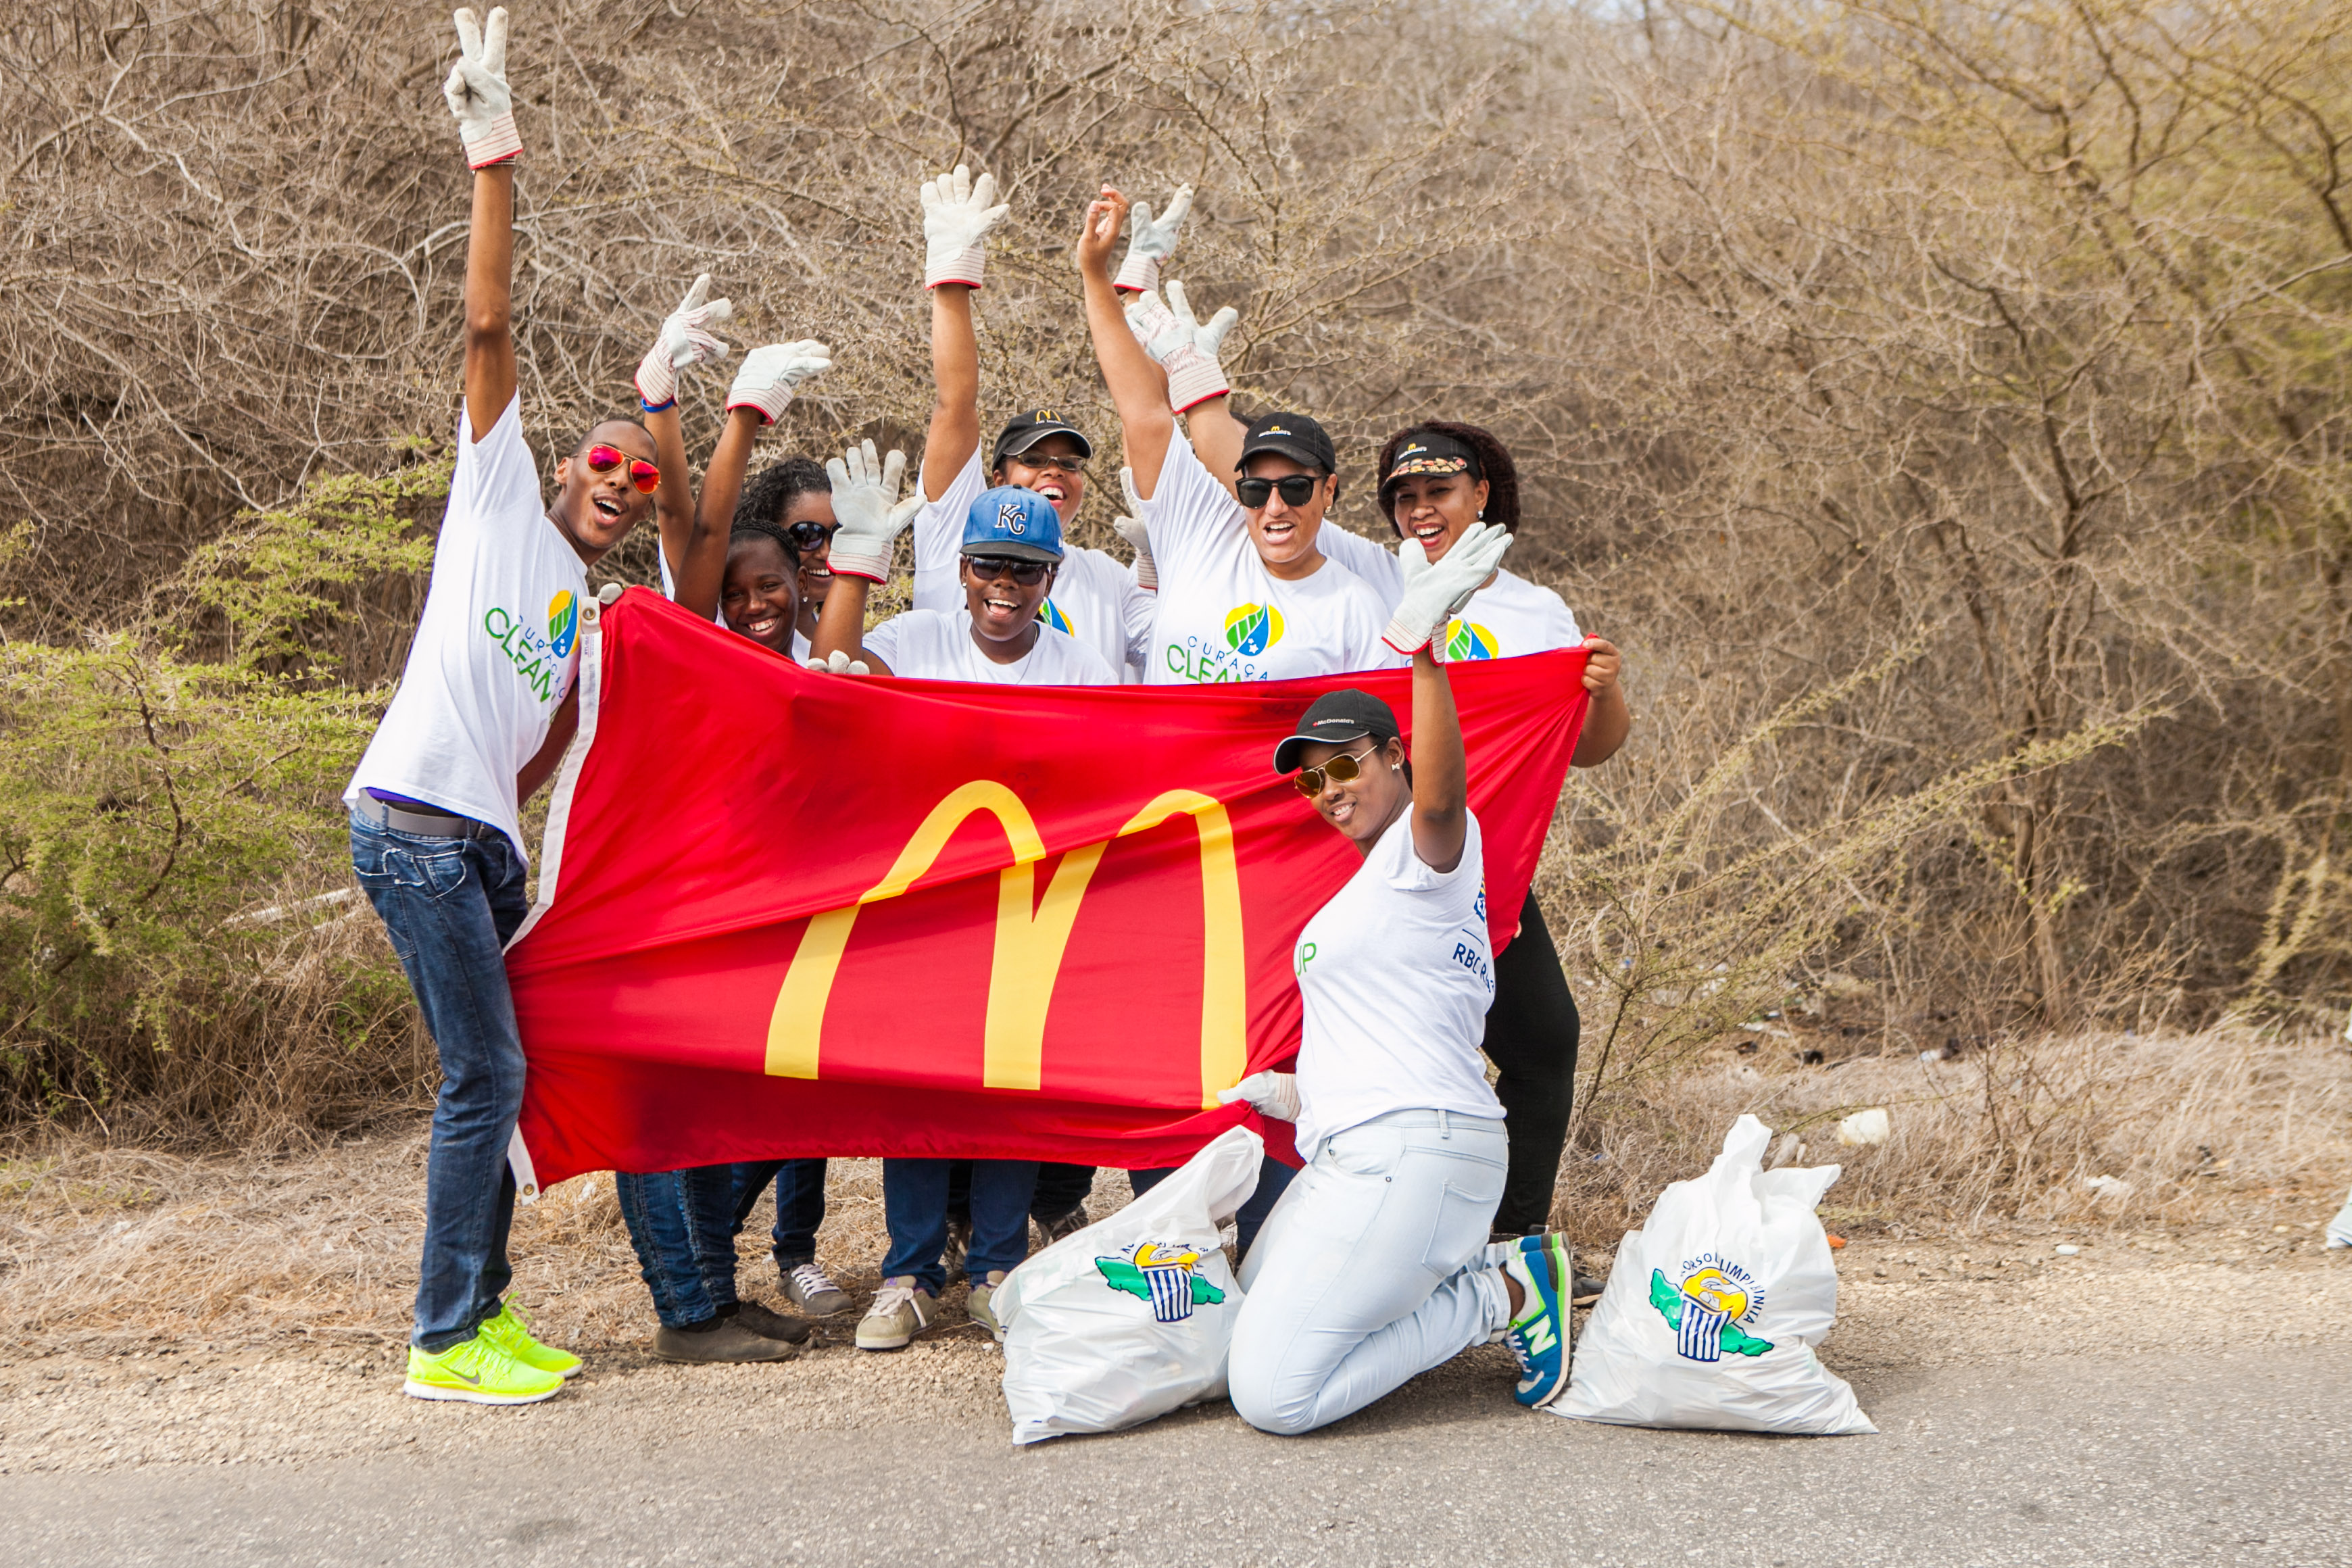 McDonald’s Curacao Clean Up event